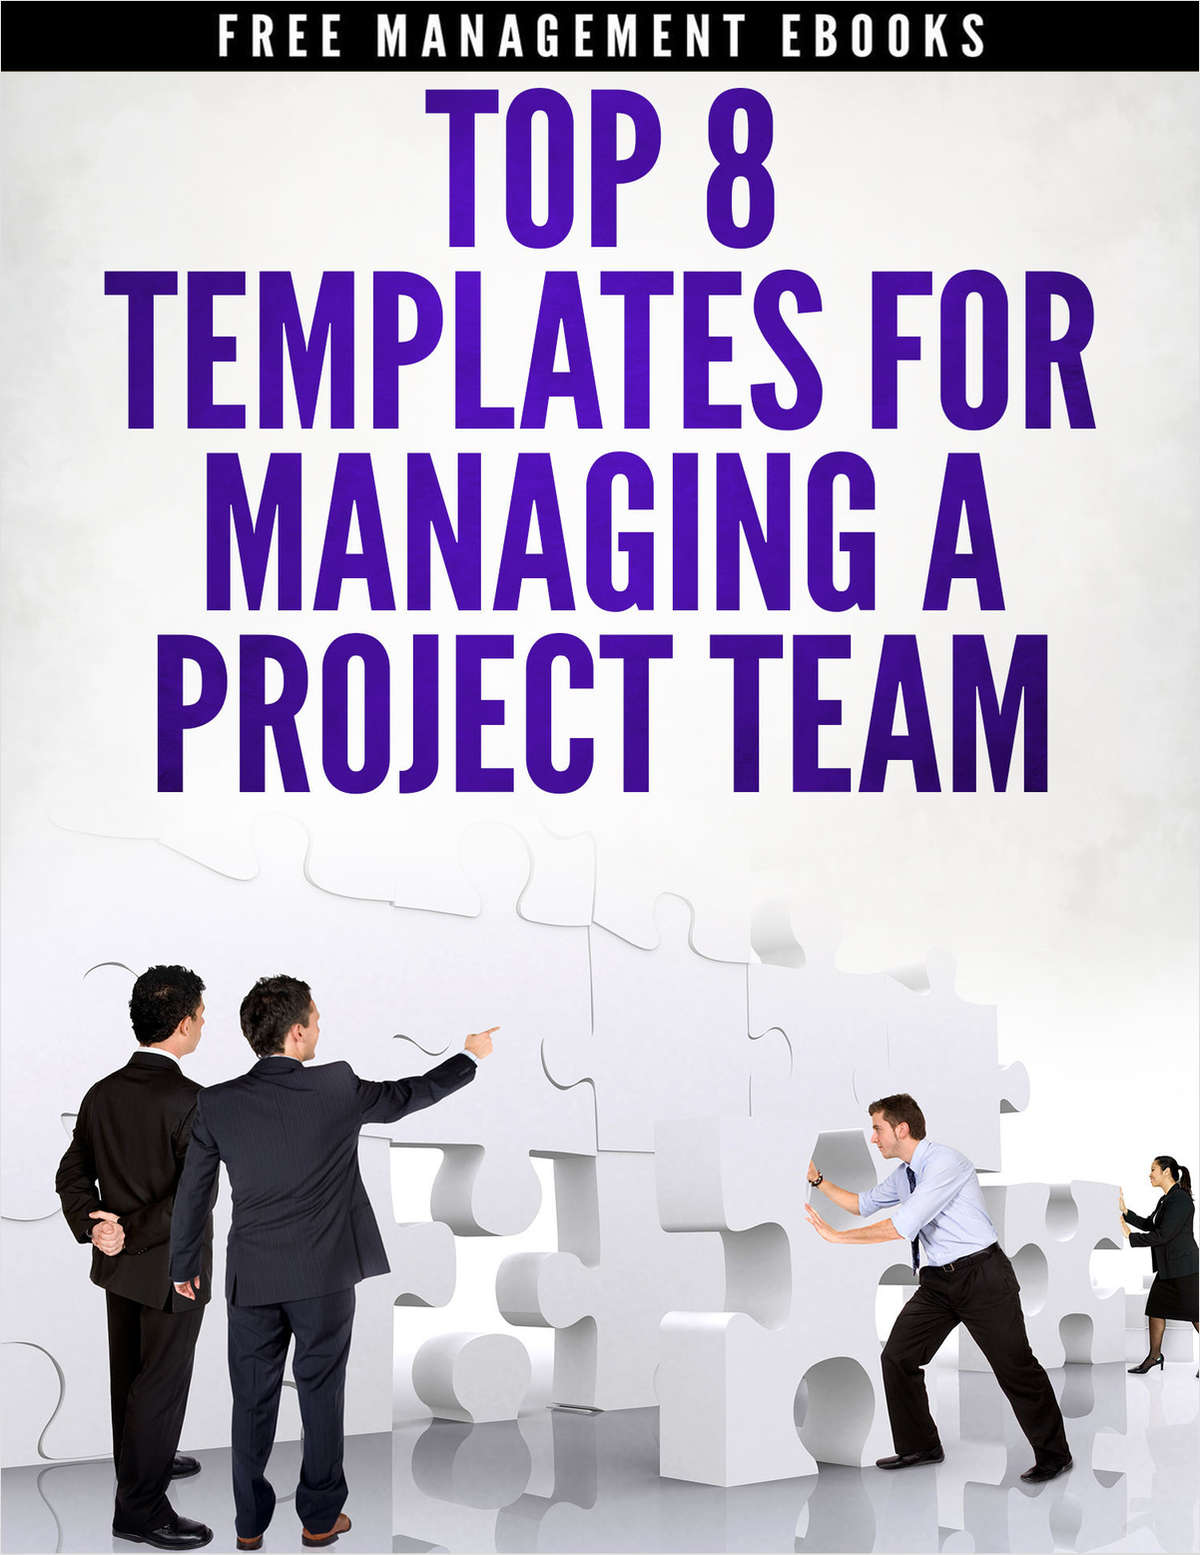 Top 8 Project Templates for Managing a Project Team